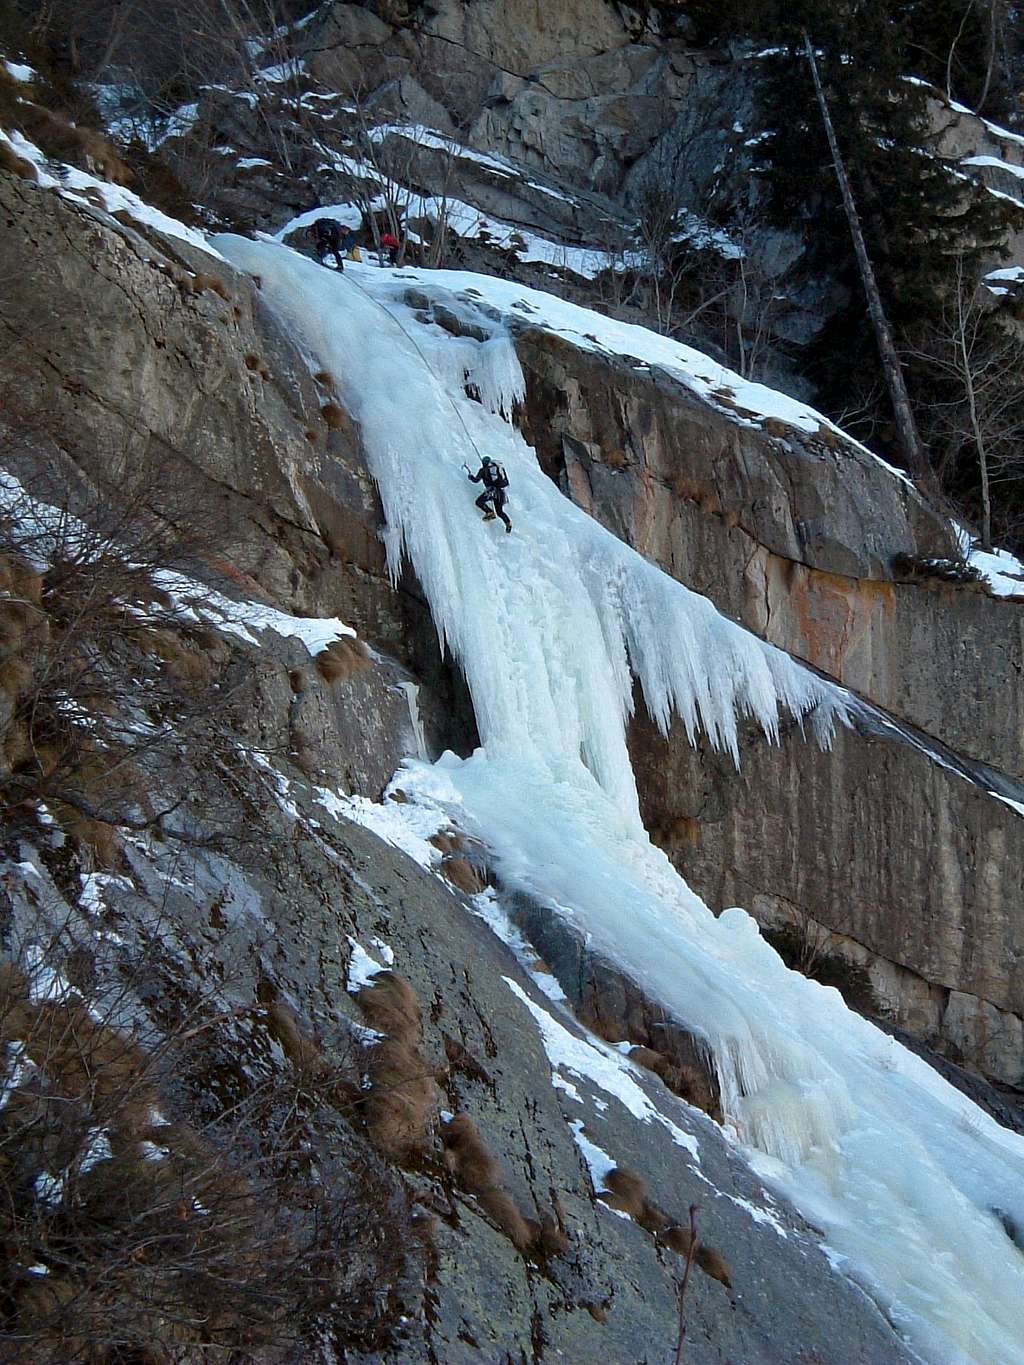 Climbing an ice fall in Daone Valley, Adamello Group